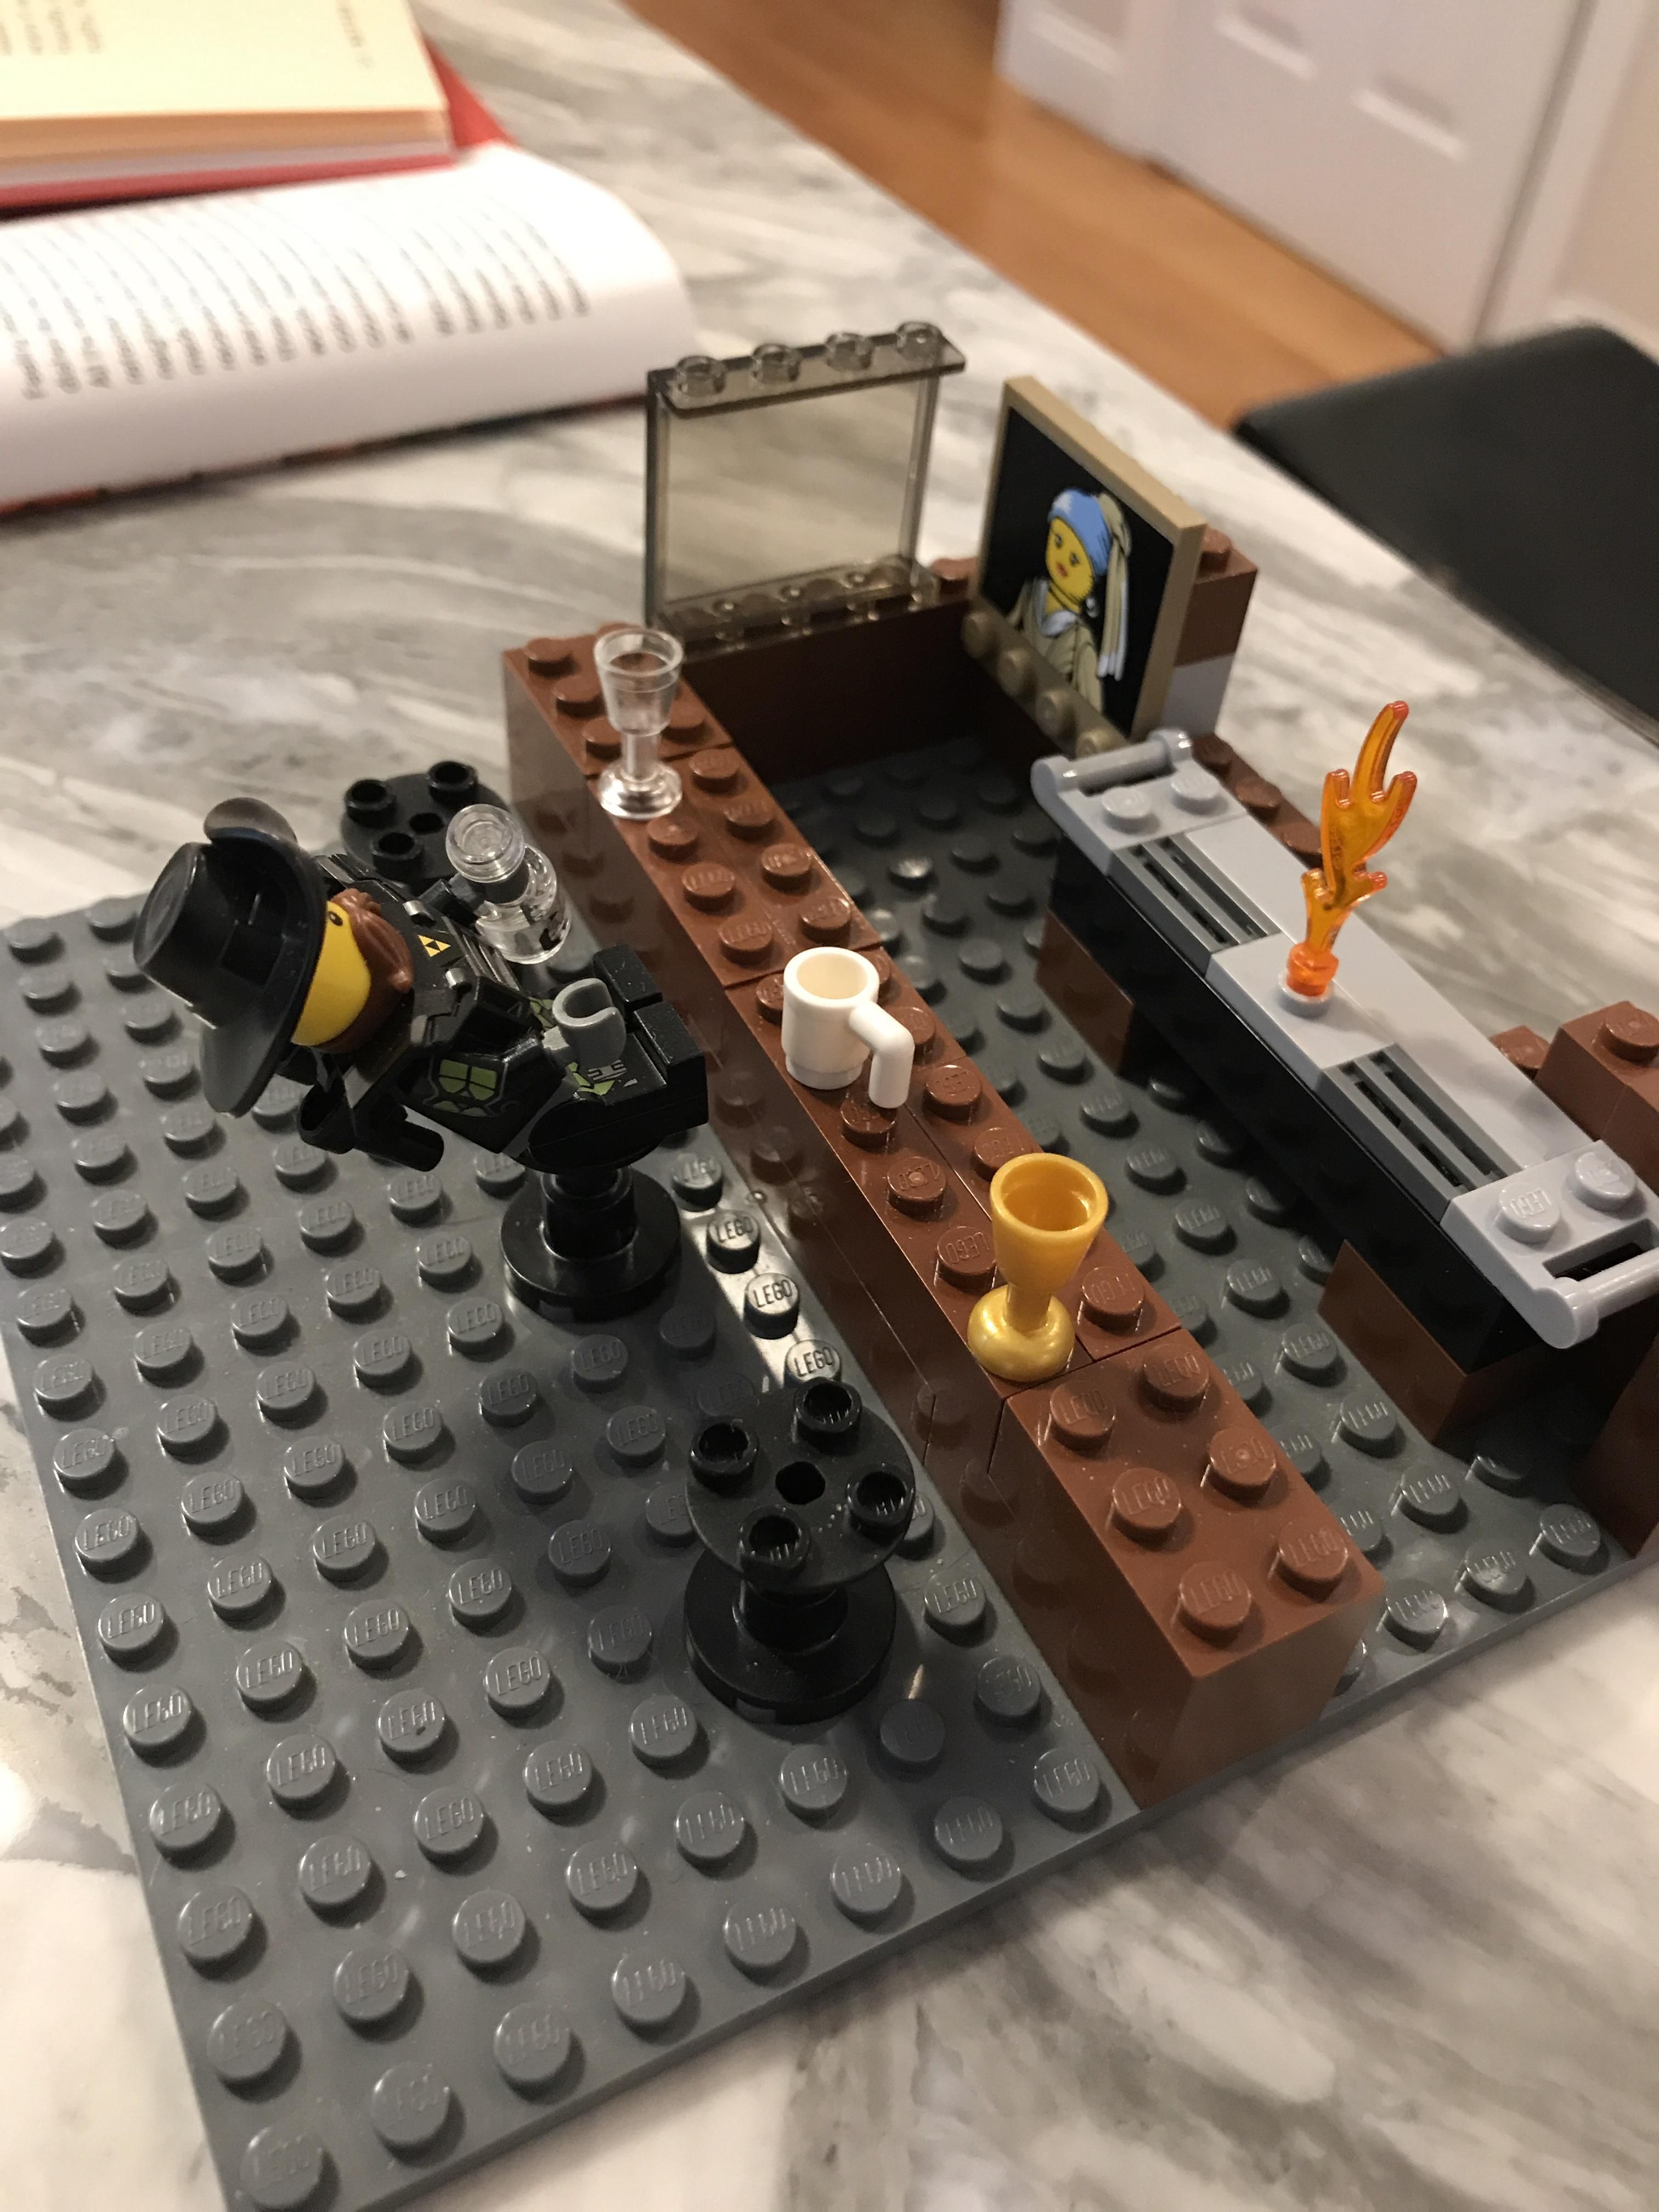 Instead of Millennium Falcons or fire trucks, my 8 year old son builds Lego bars with drunk patrons.